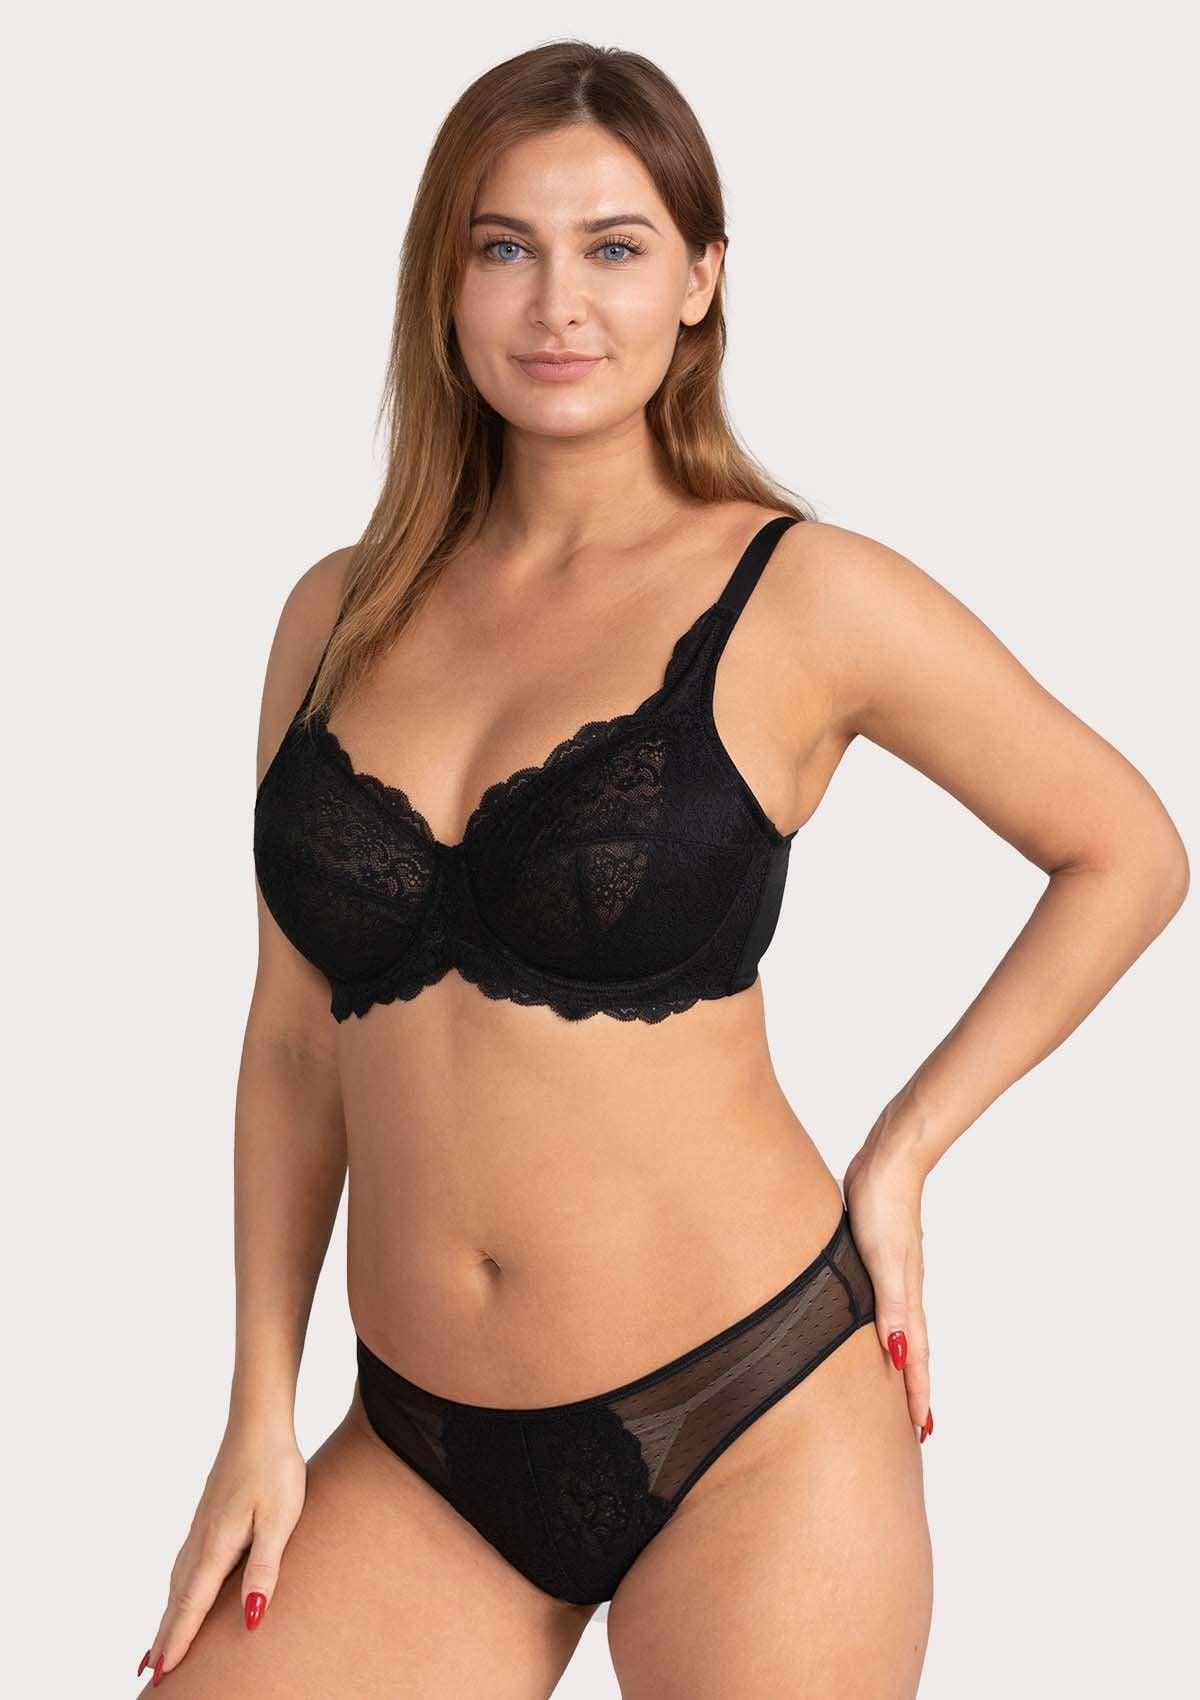 HSIA All-Over Floral Lace Unlined Bra: Minimizer Bra For Heavy Breasts - Dark Green / 36 / DDD/F